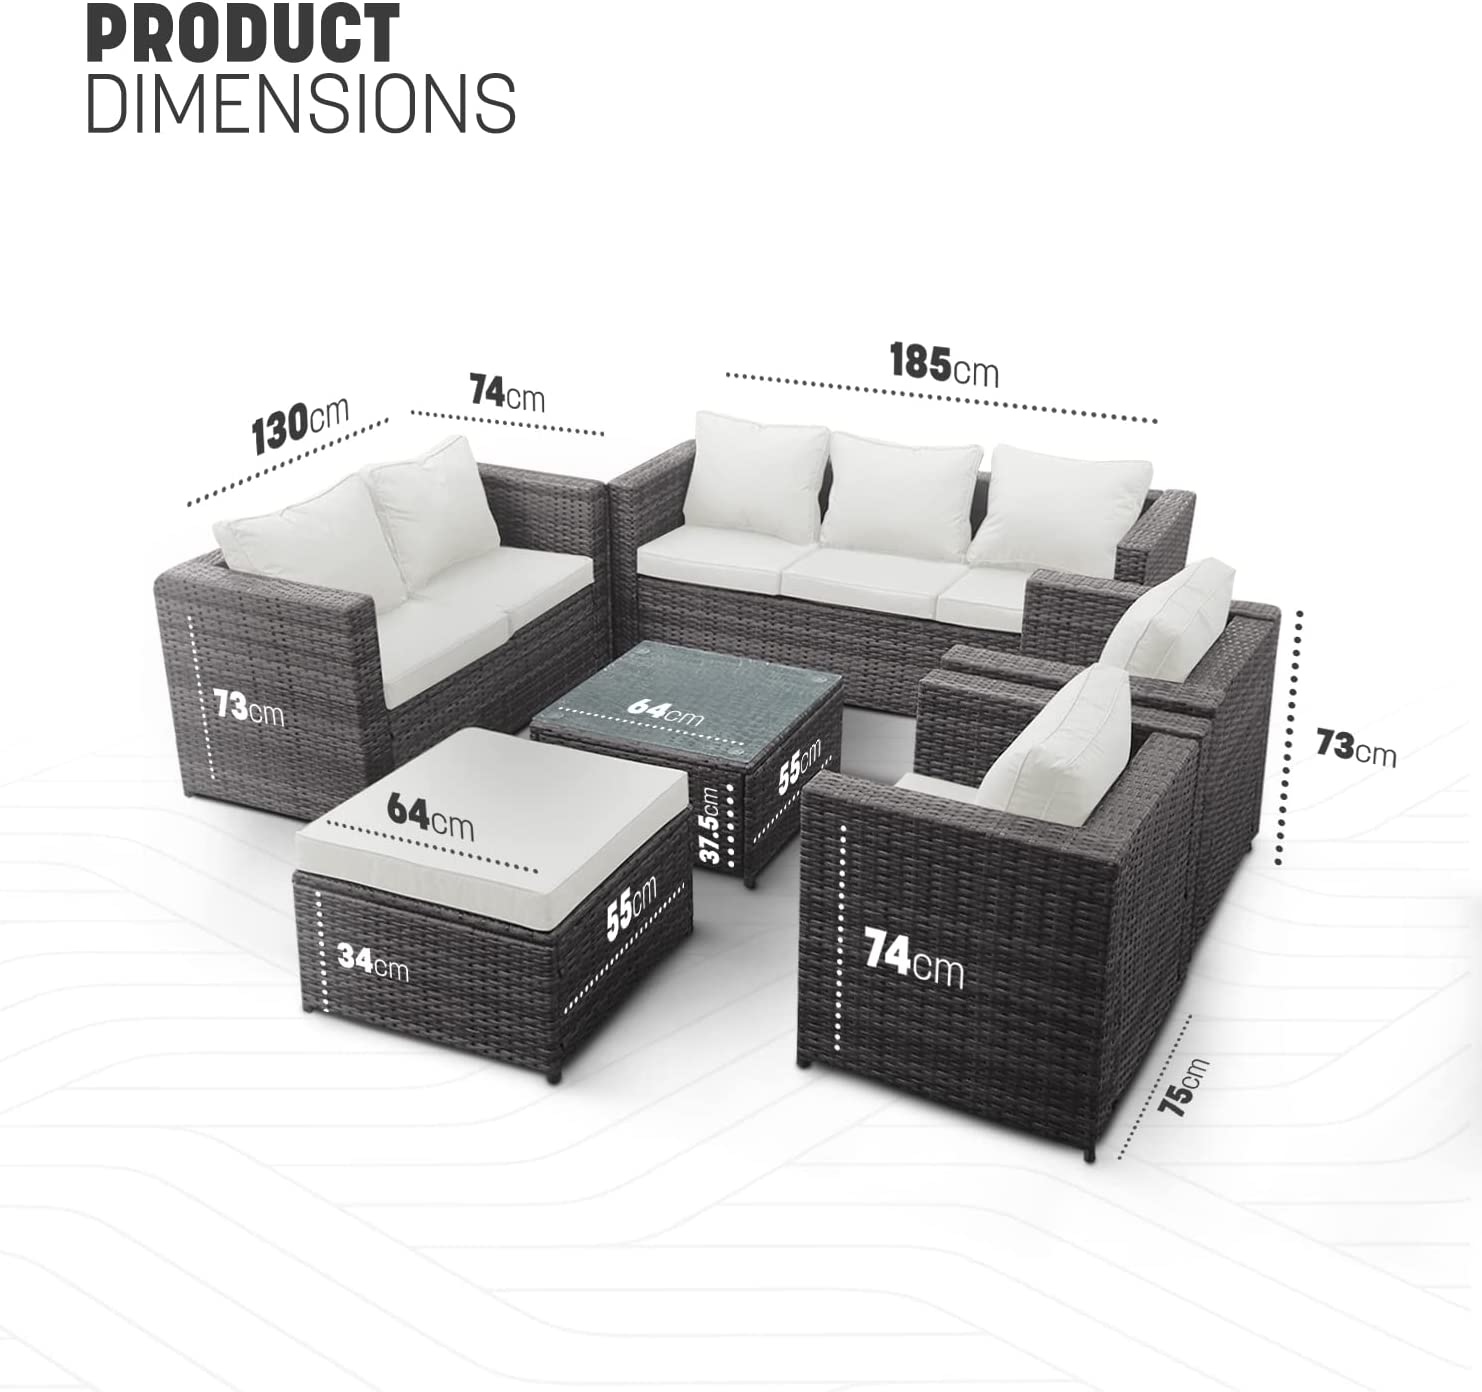 8 Seater Rattan Garden Furniture Set with Glass Coffee Table, Stool & Water Resistant Cushions